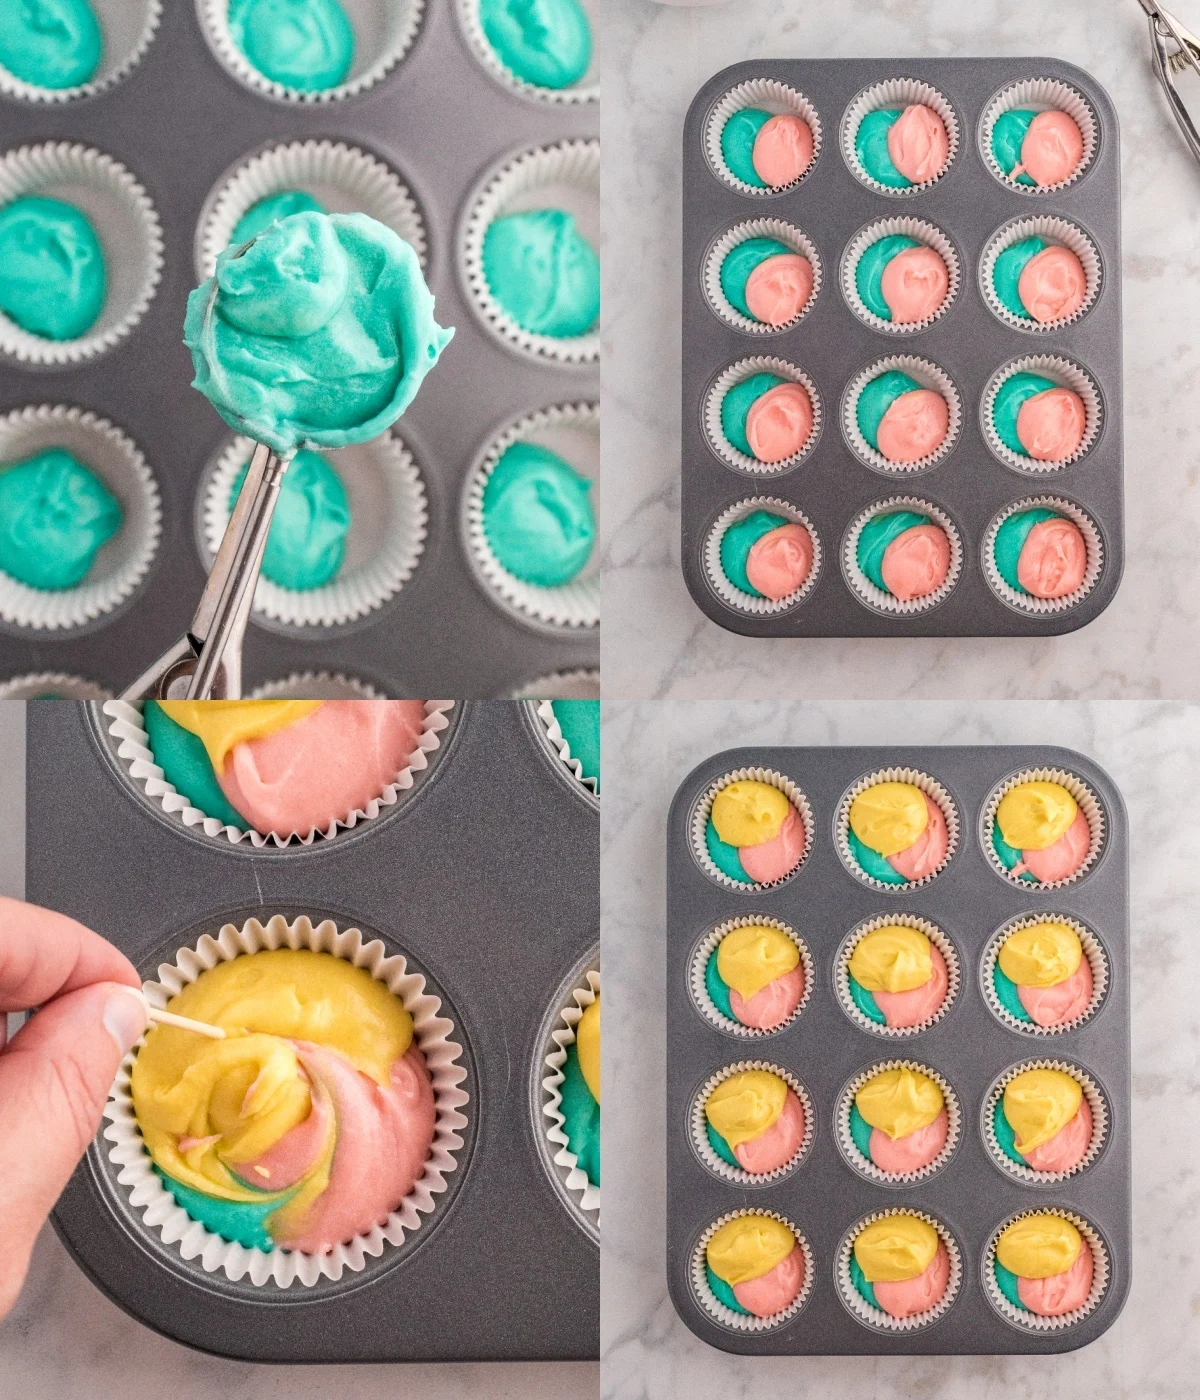 Adding the cupcake batter to the liners and swirling the colors